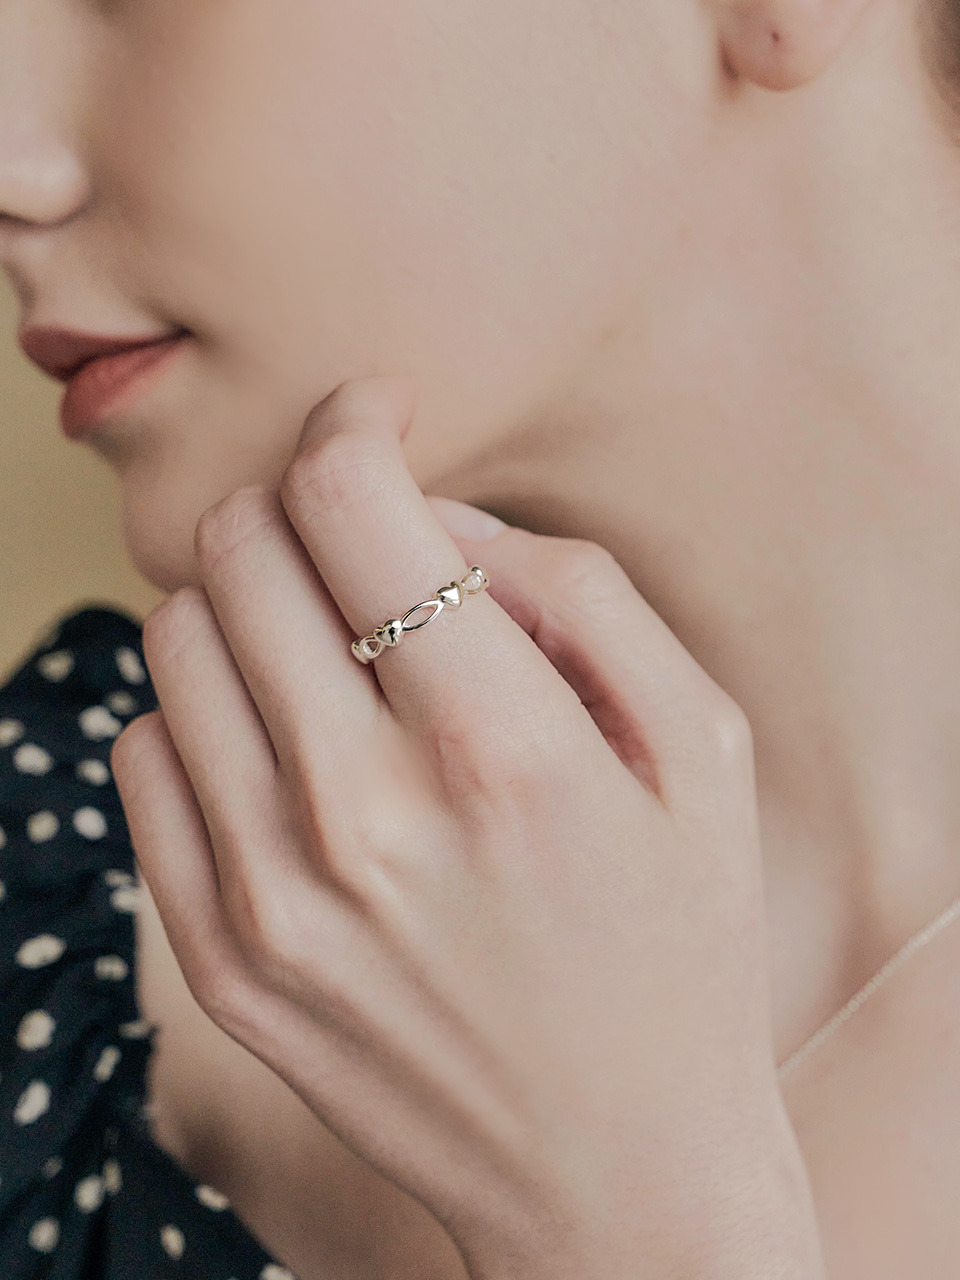 isabel heart ring